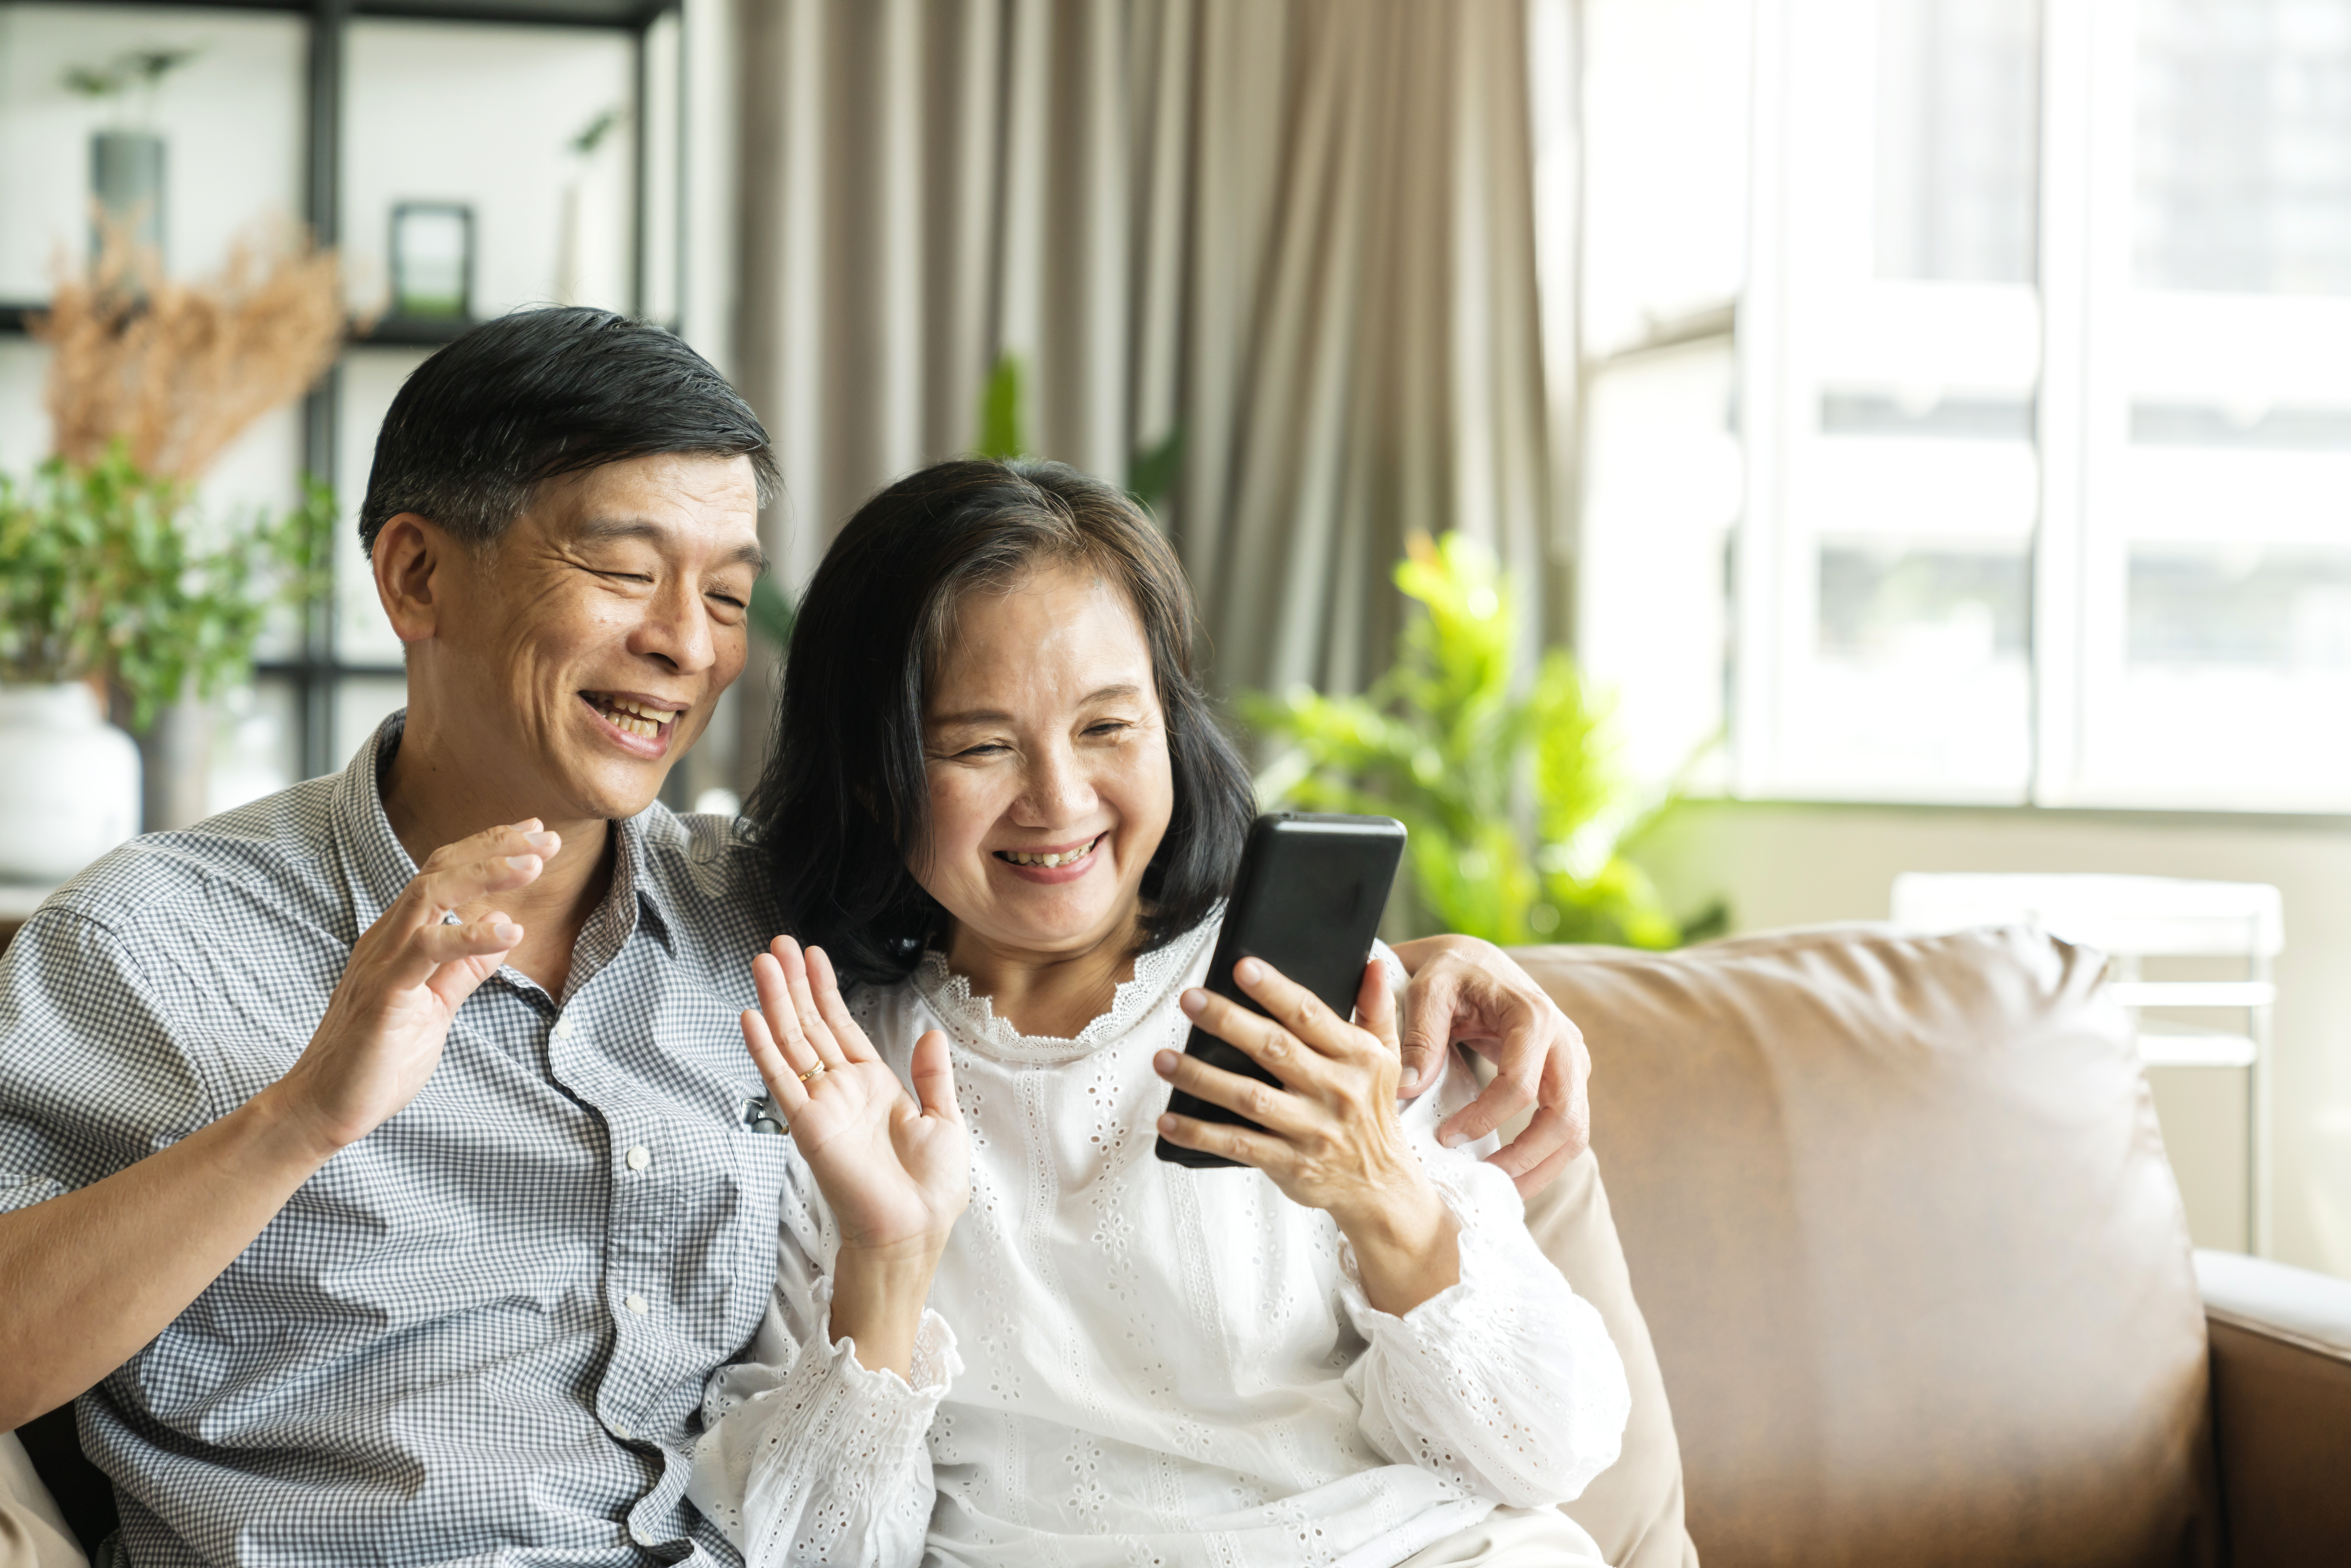 Couple waving while holding up cell phone.